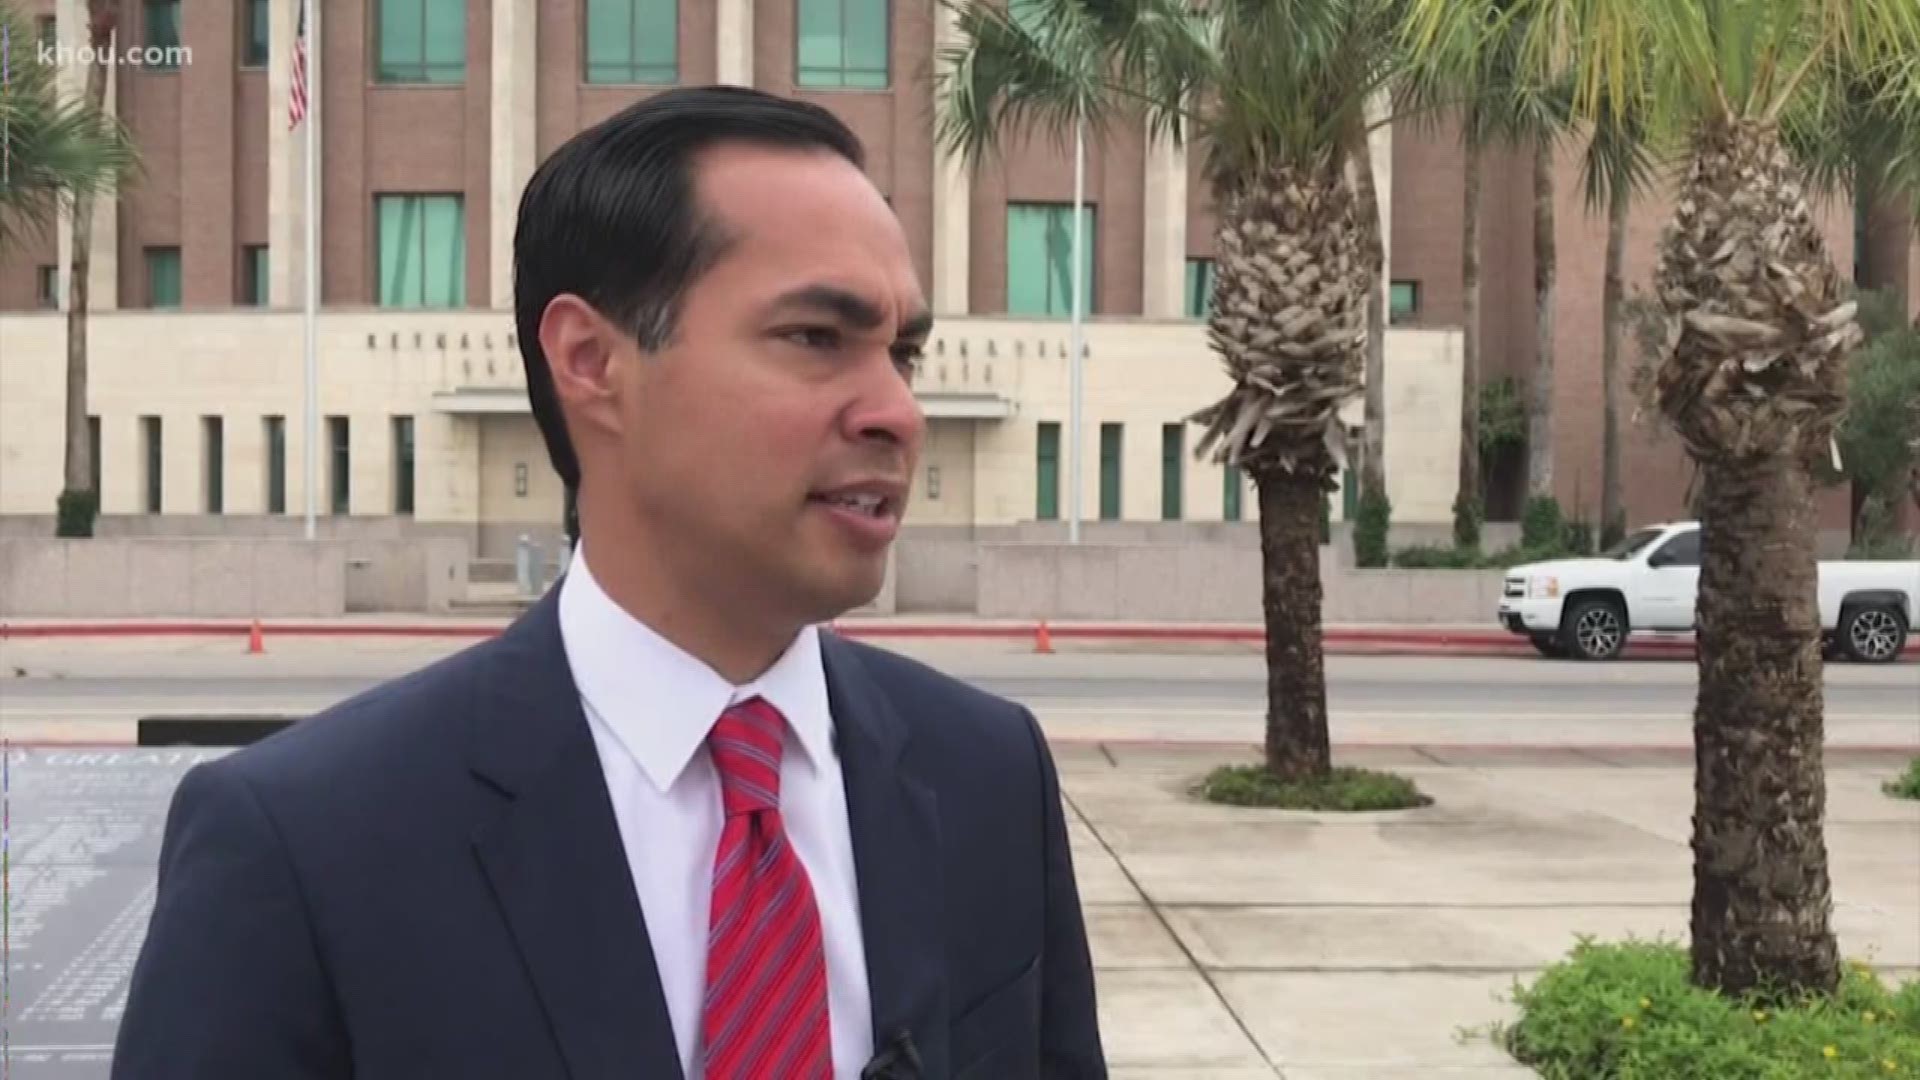 Former Obama housing chief Julian Castro says he's taking a step toward a possible White House campaign in 2020 by forming a presidential exploratory committee. The Texas Democrat tells The Associated Press that he will announce a decision Jan. 12.